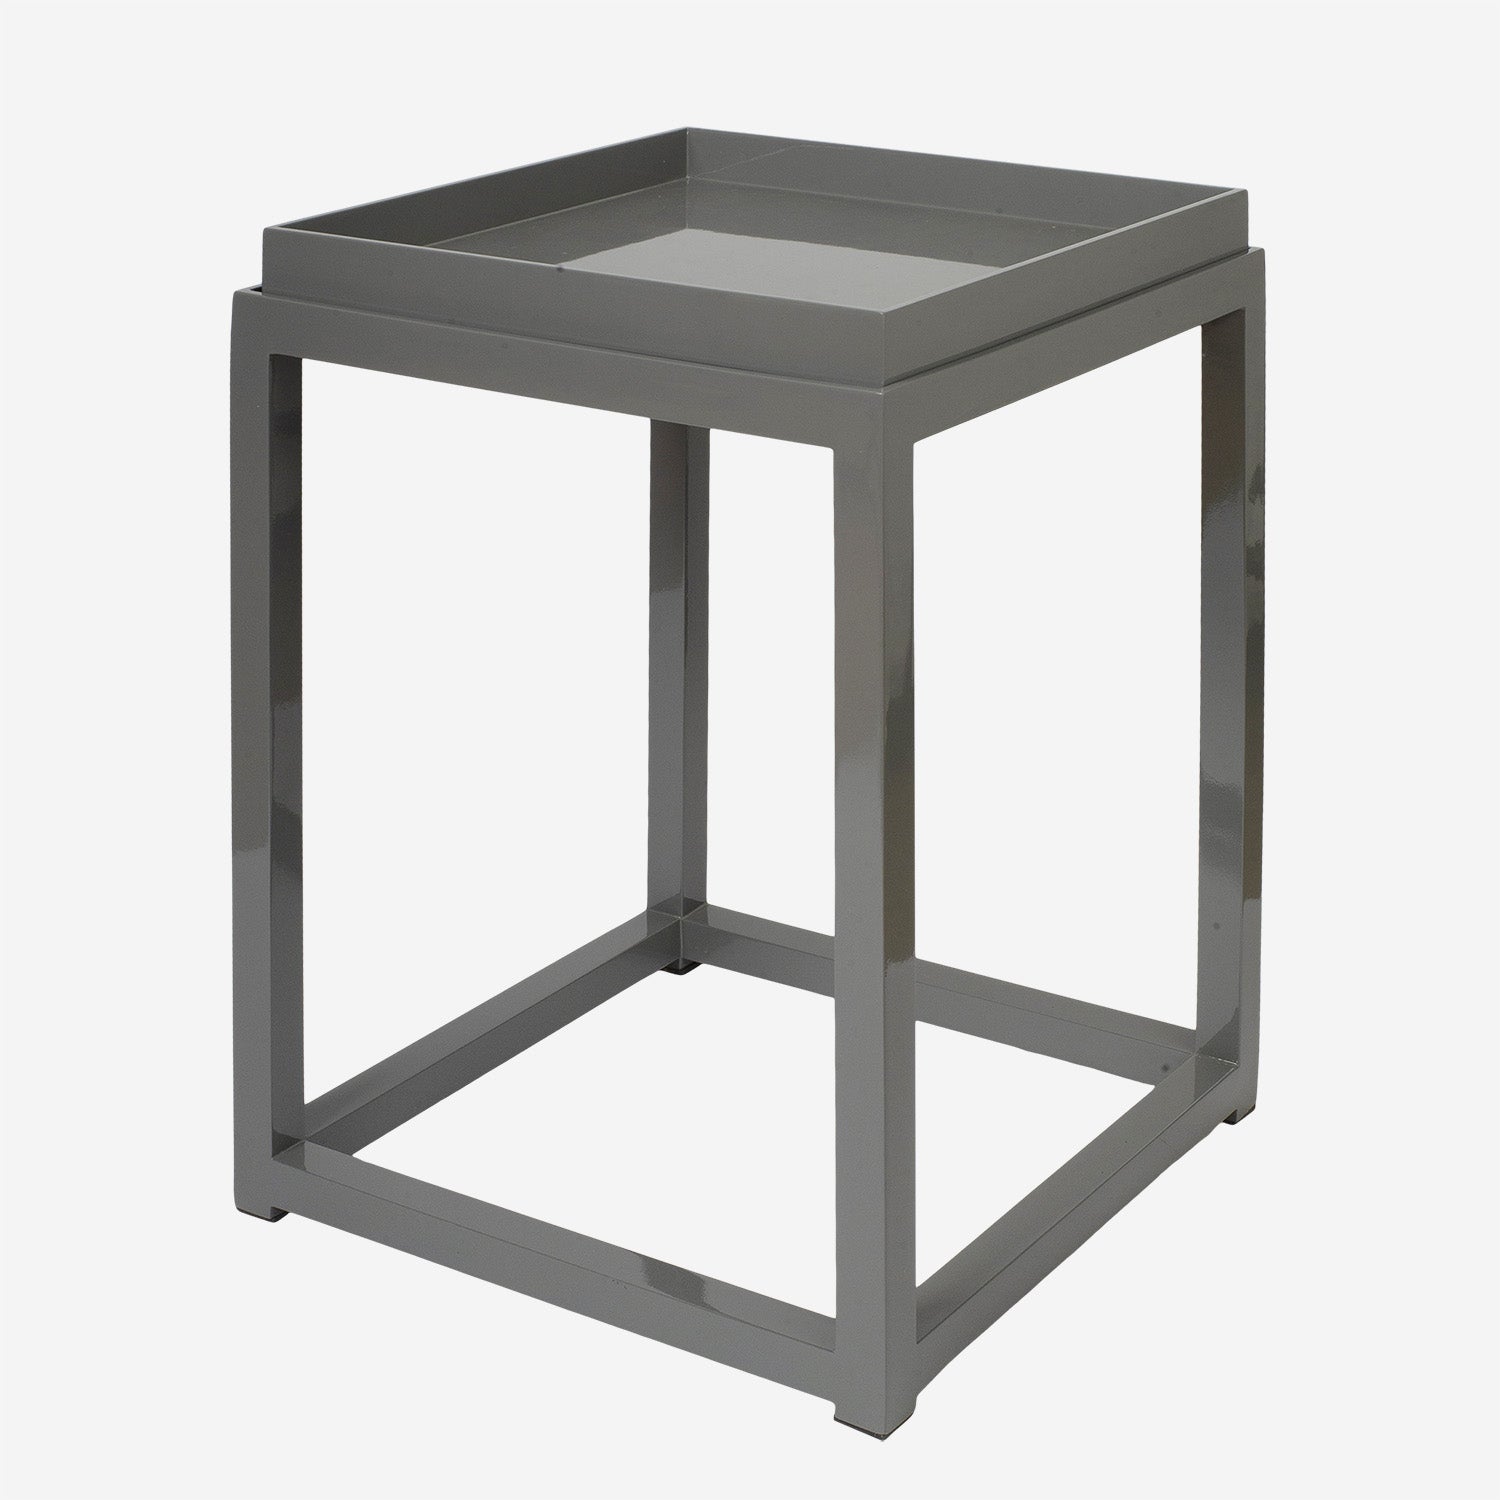 Lacquer table with Tray Tall Grey